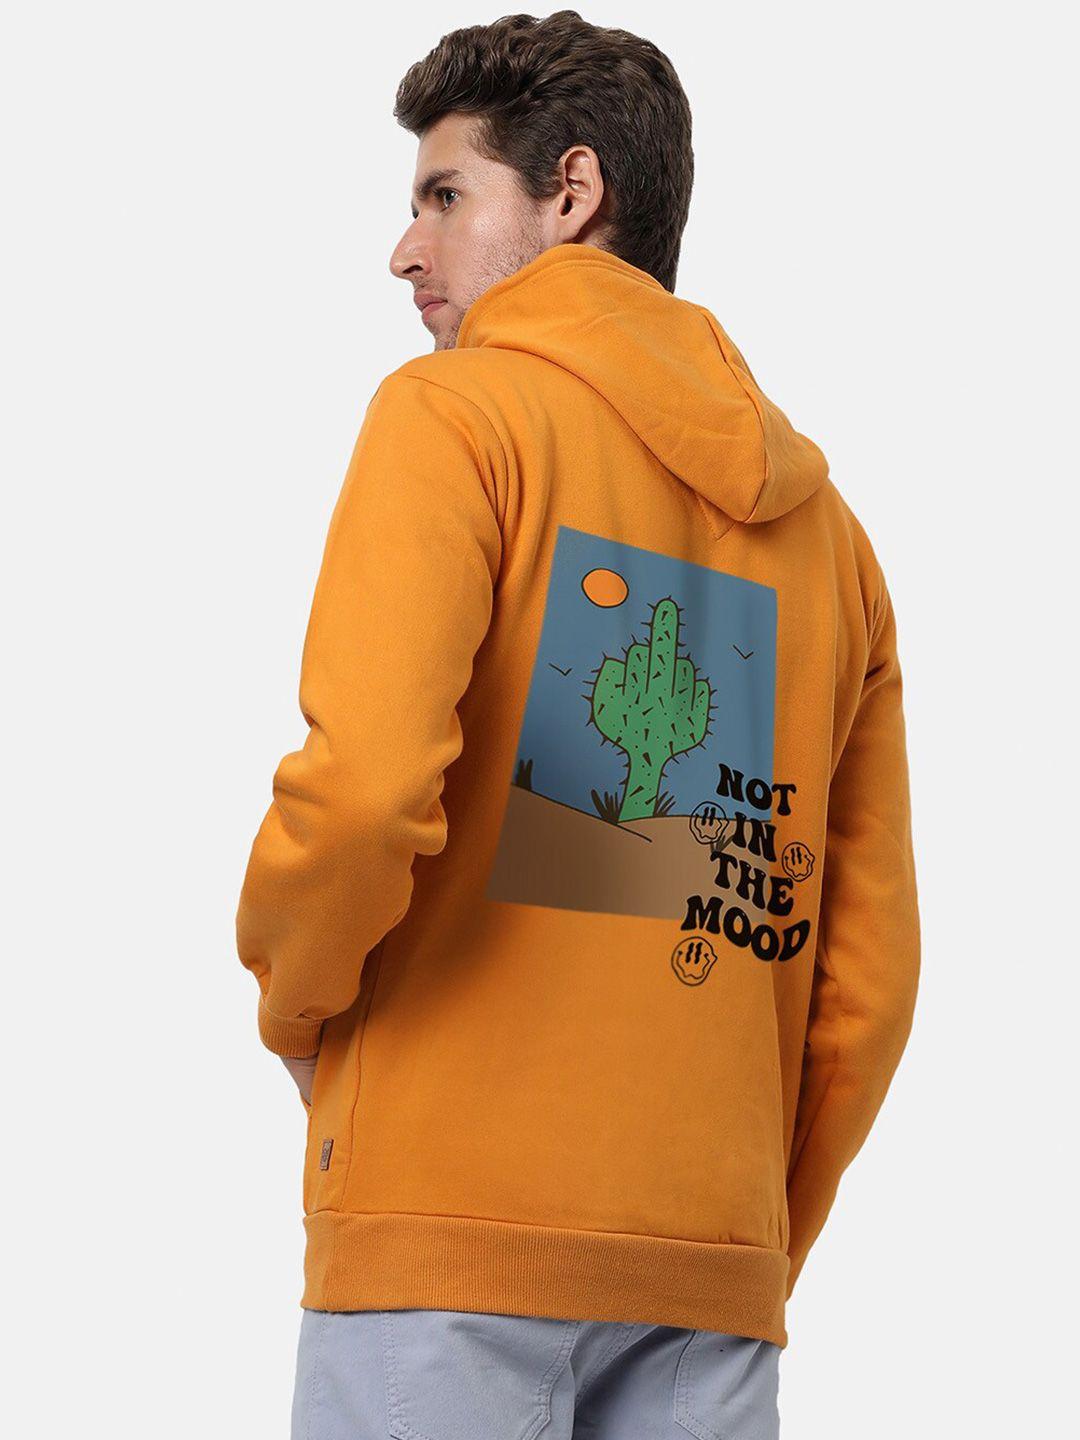 campus-sutra-graphic-printed-hooded-cotton-sweatshirt